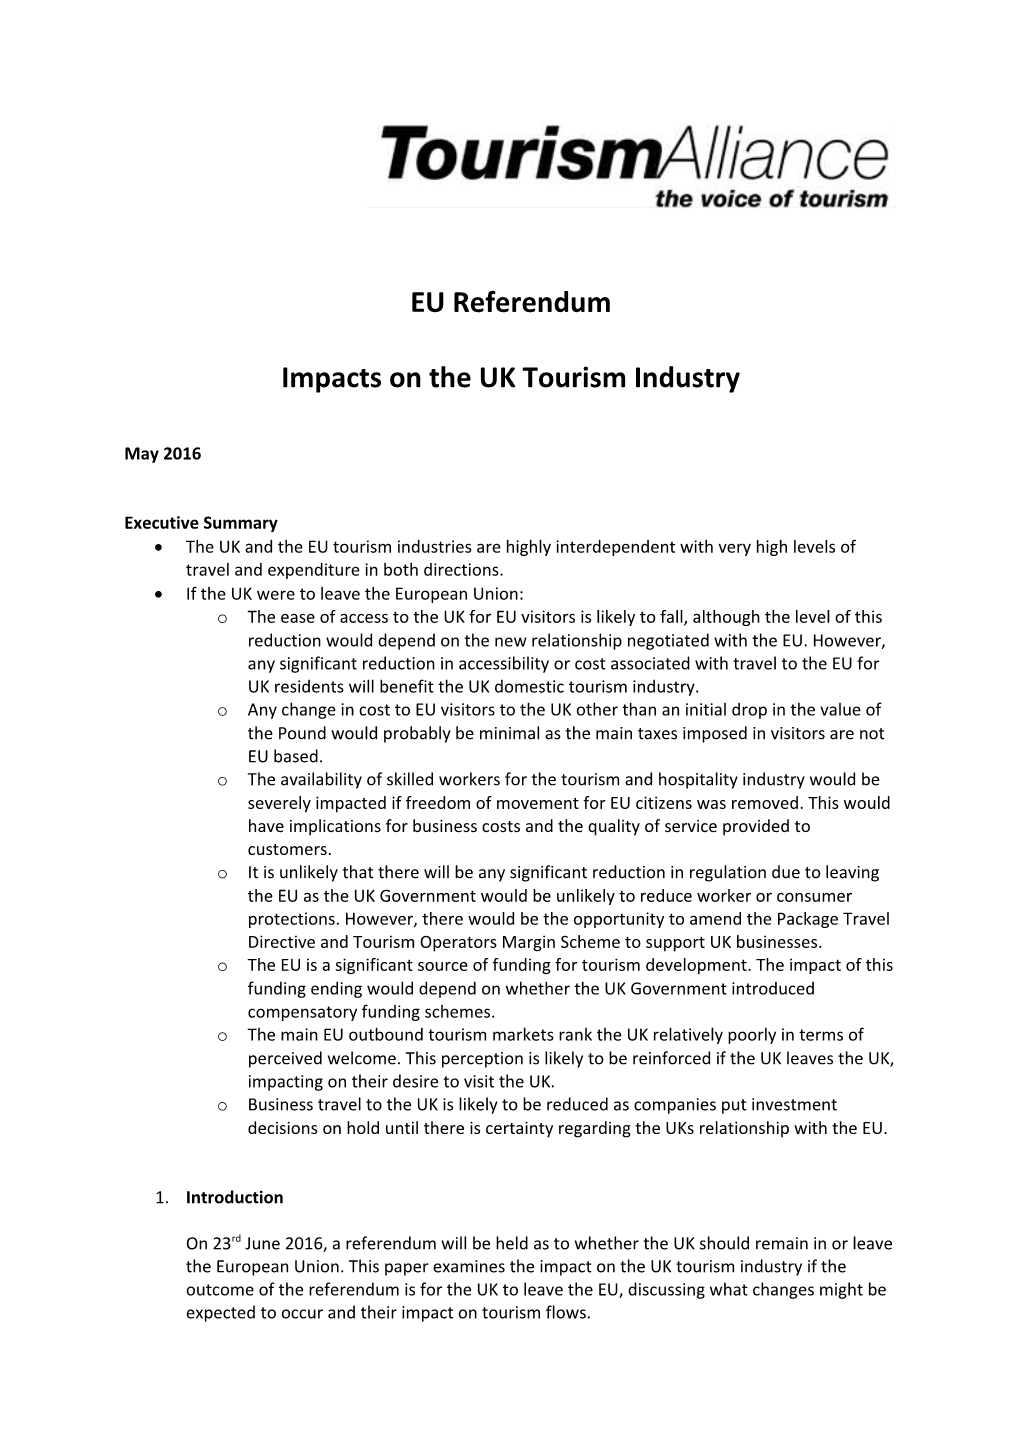 Impacts on the UK Tourism Industry